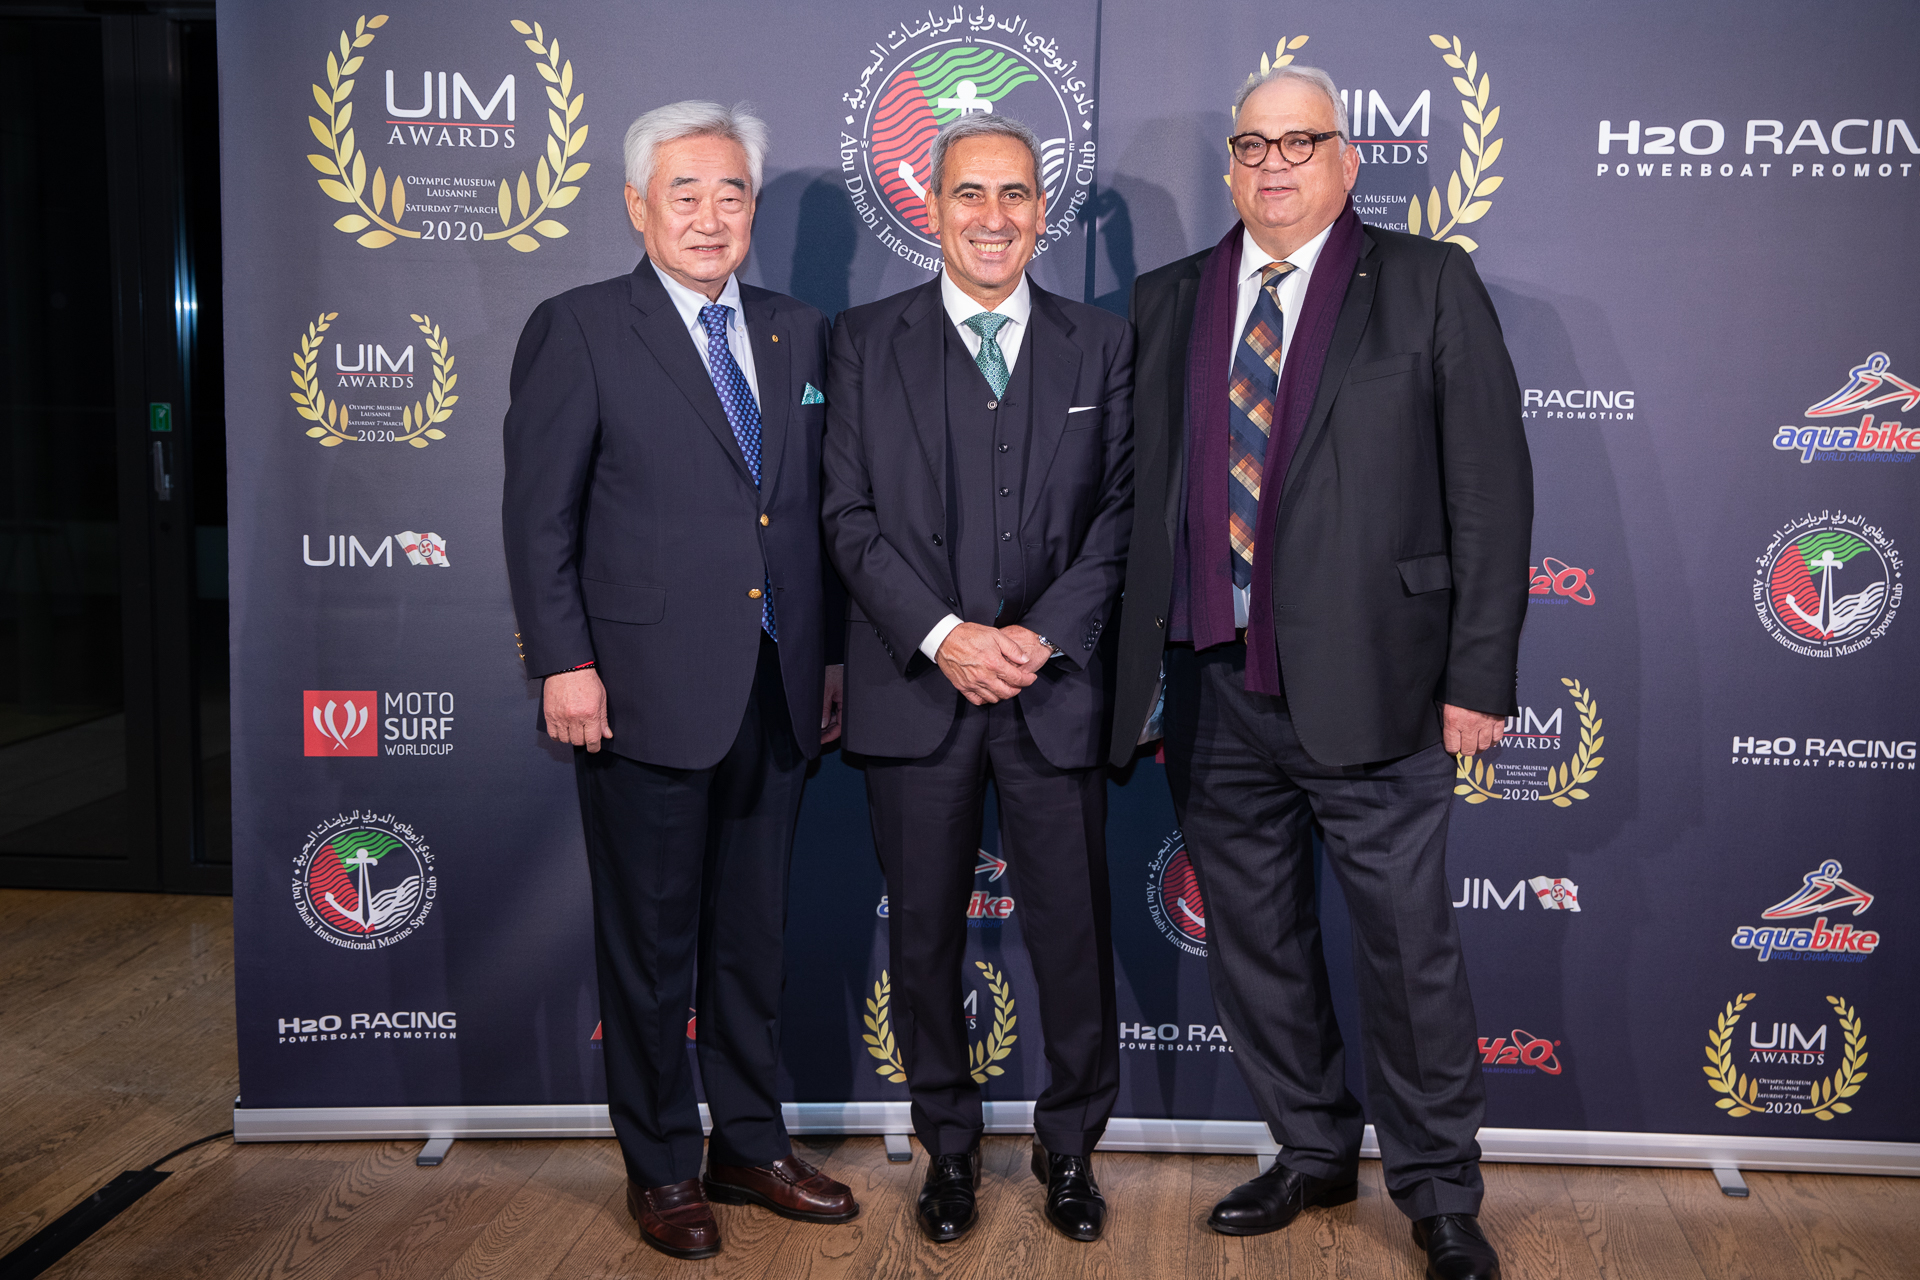 from left) Dr. Choue, Mr. Chiulli and Mr. Lalovic